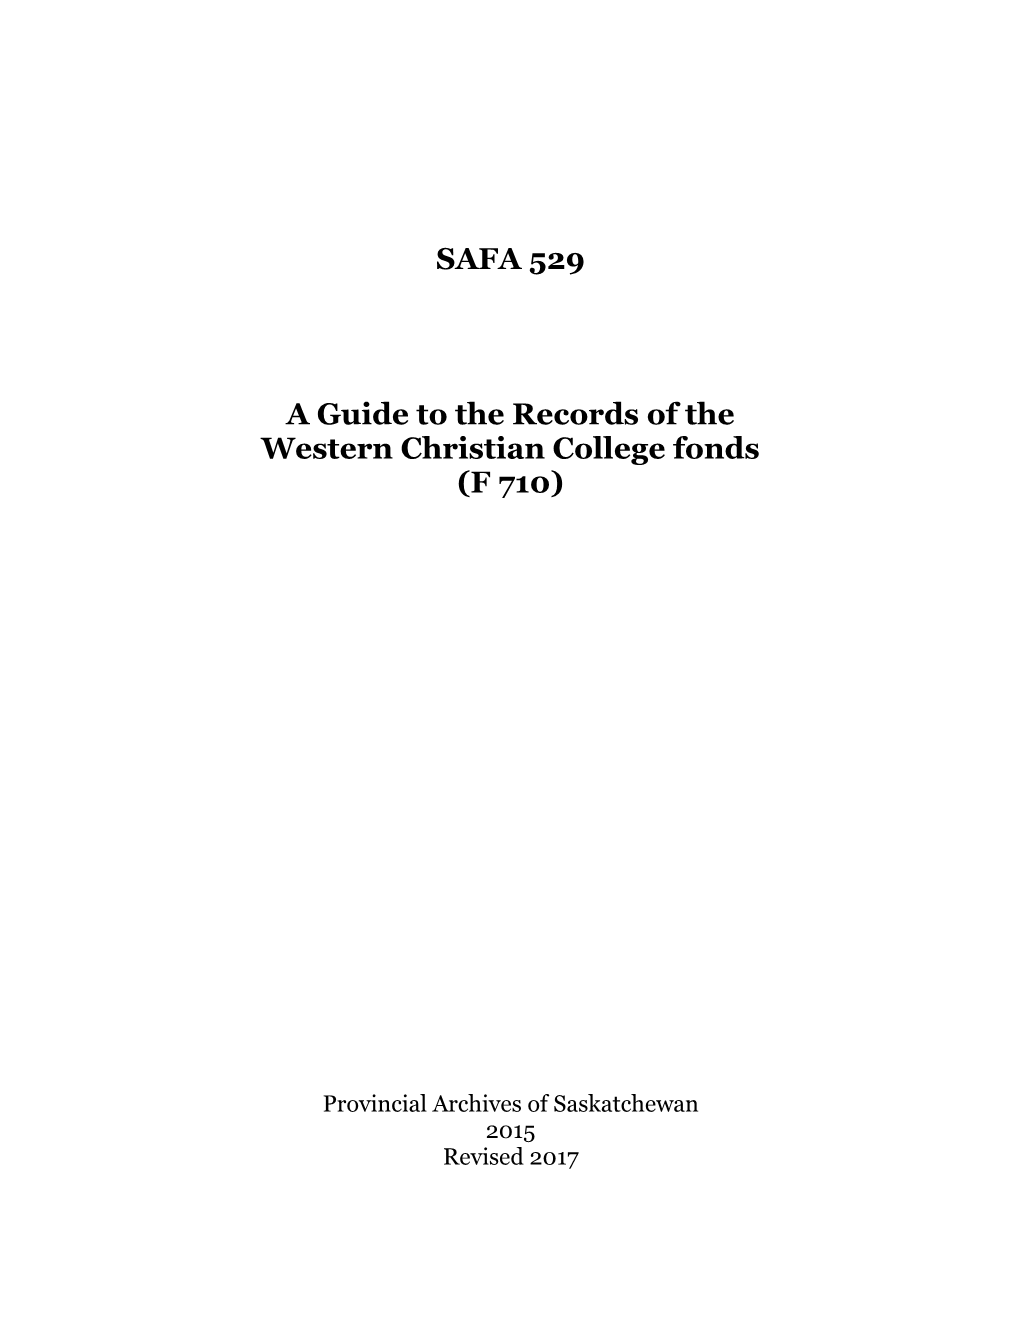 SAFA 529 a Guide to the Records of the Western Christian College